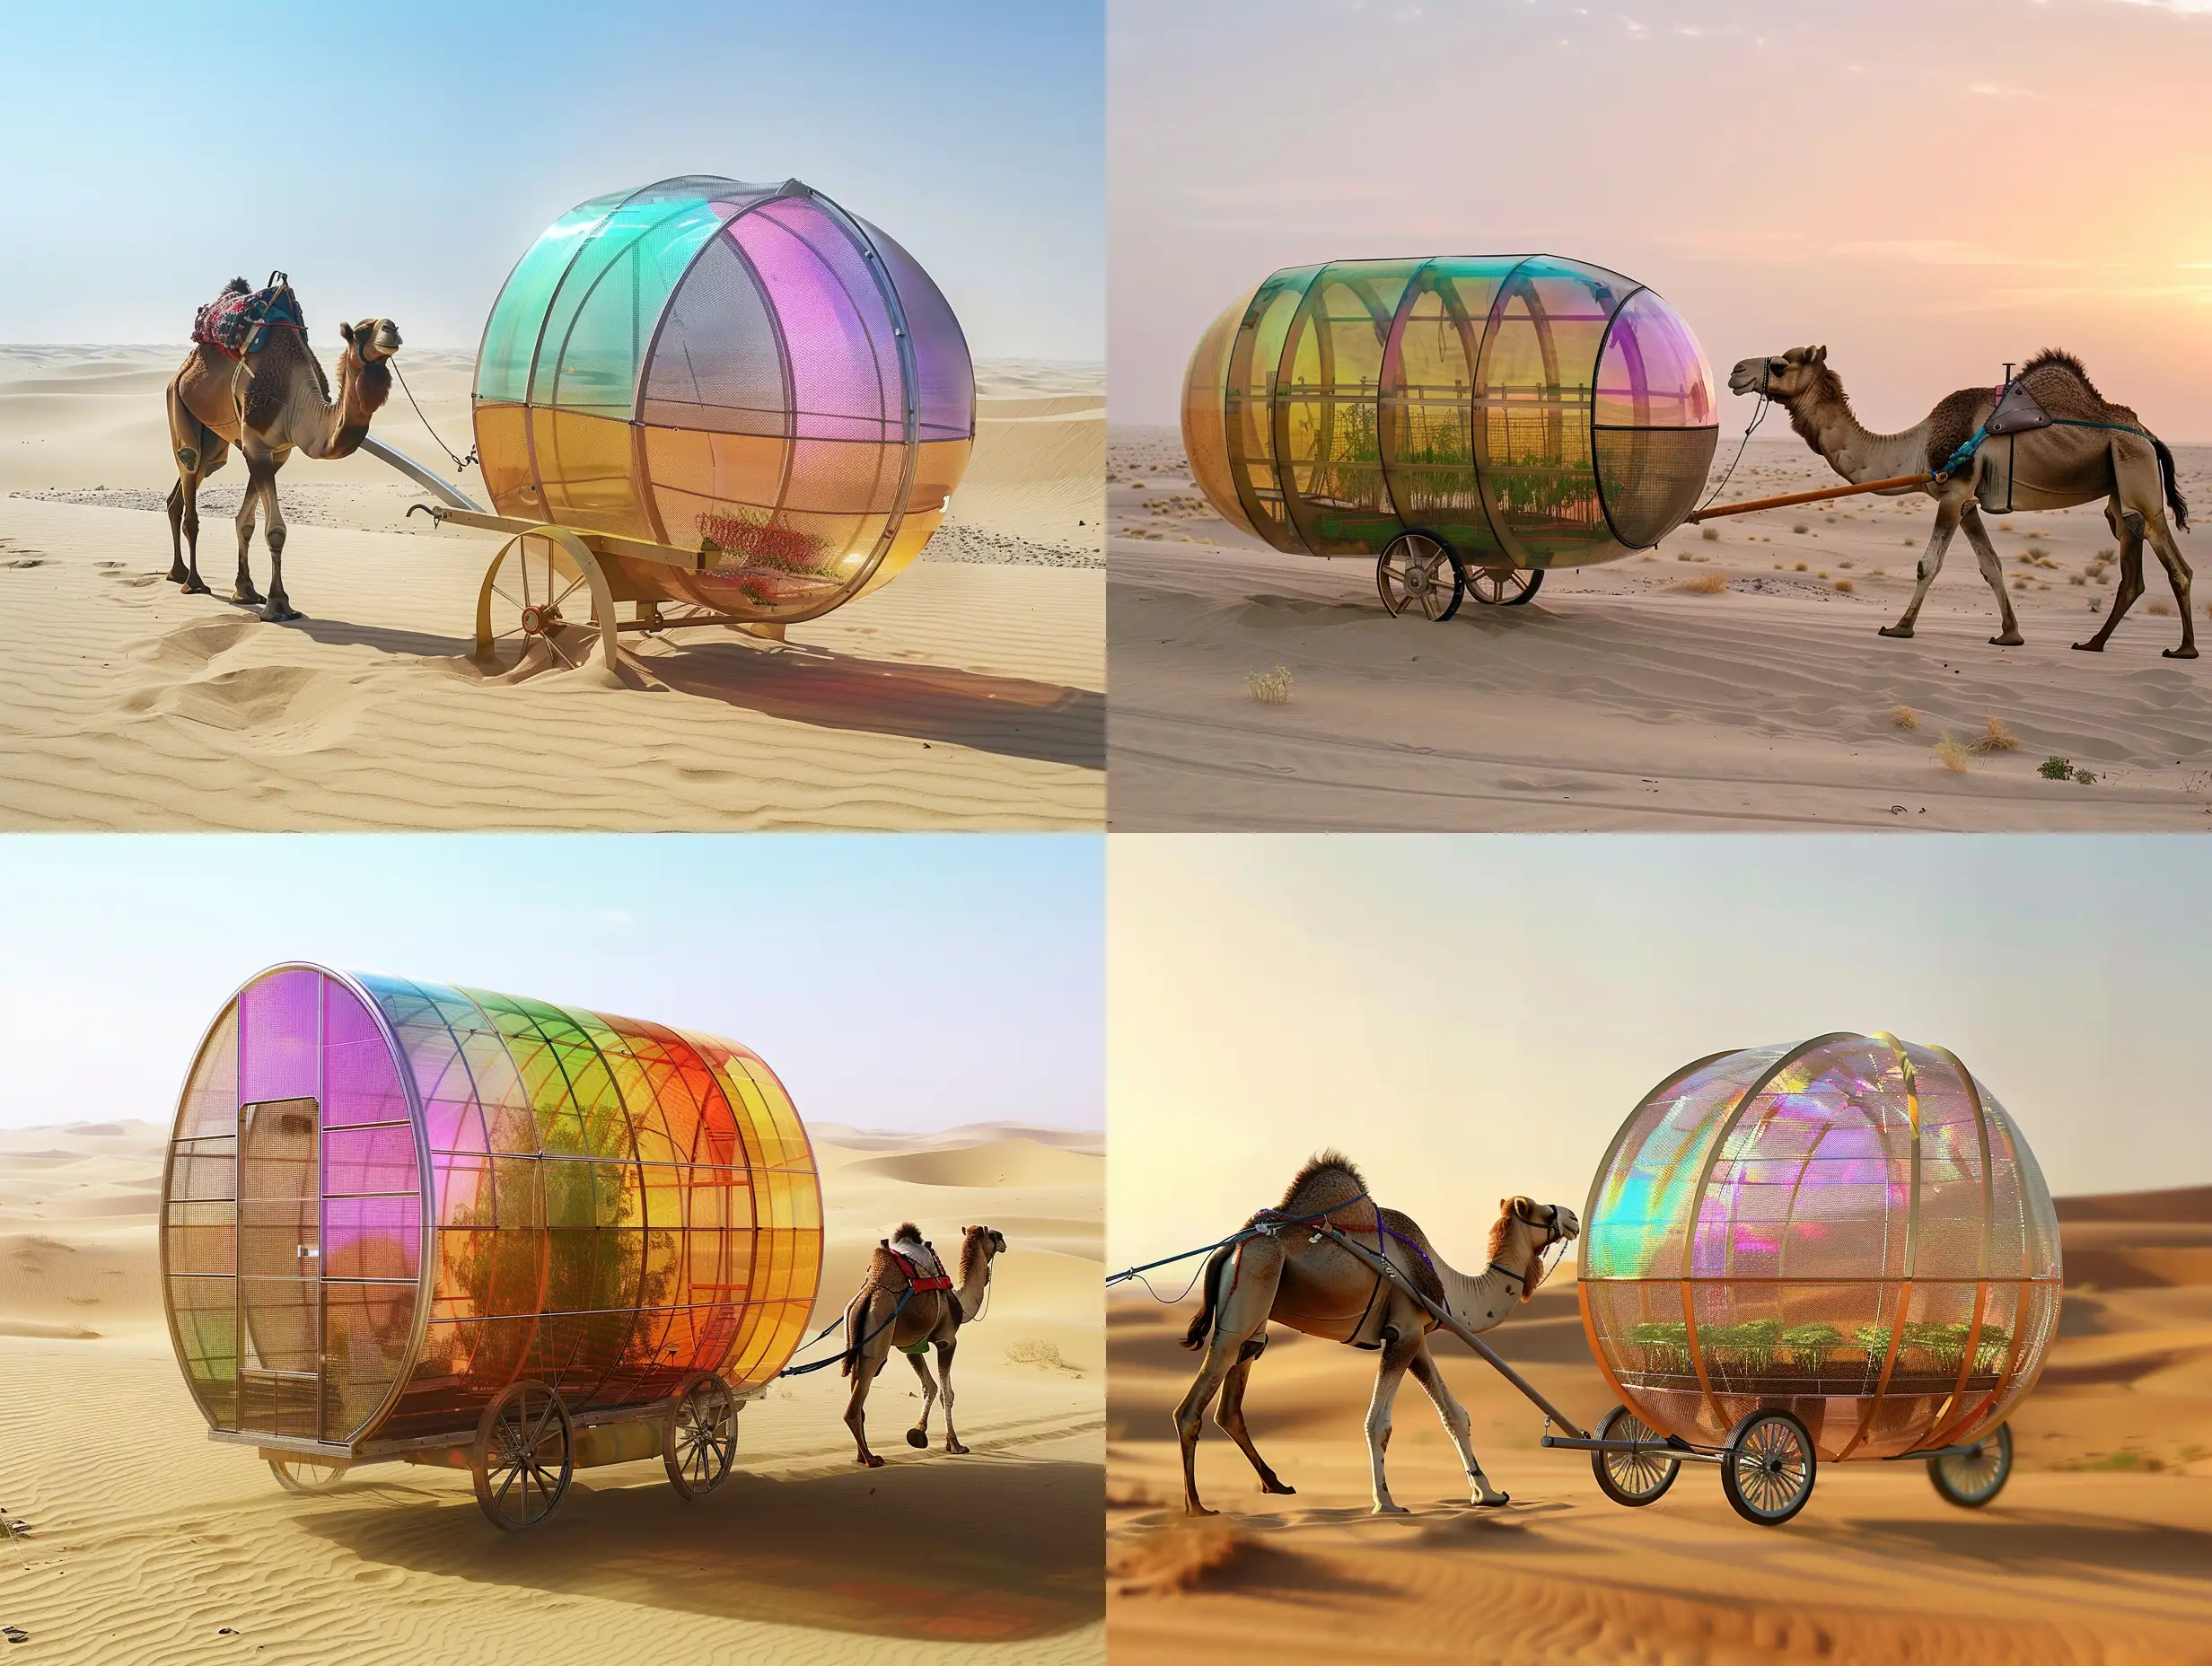 CamelPulled-Plant-Growth-Dome-in-the-Desert